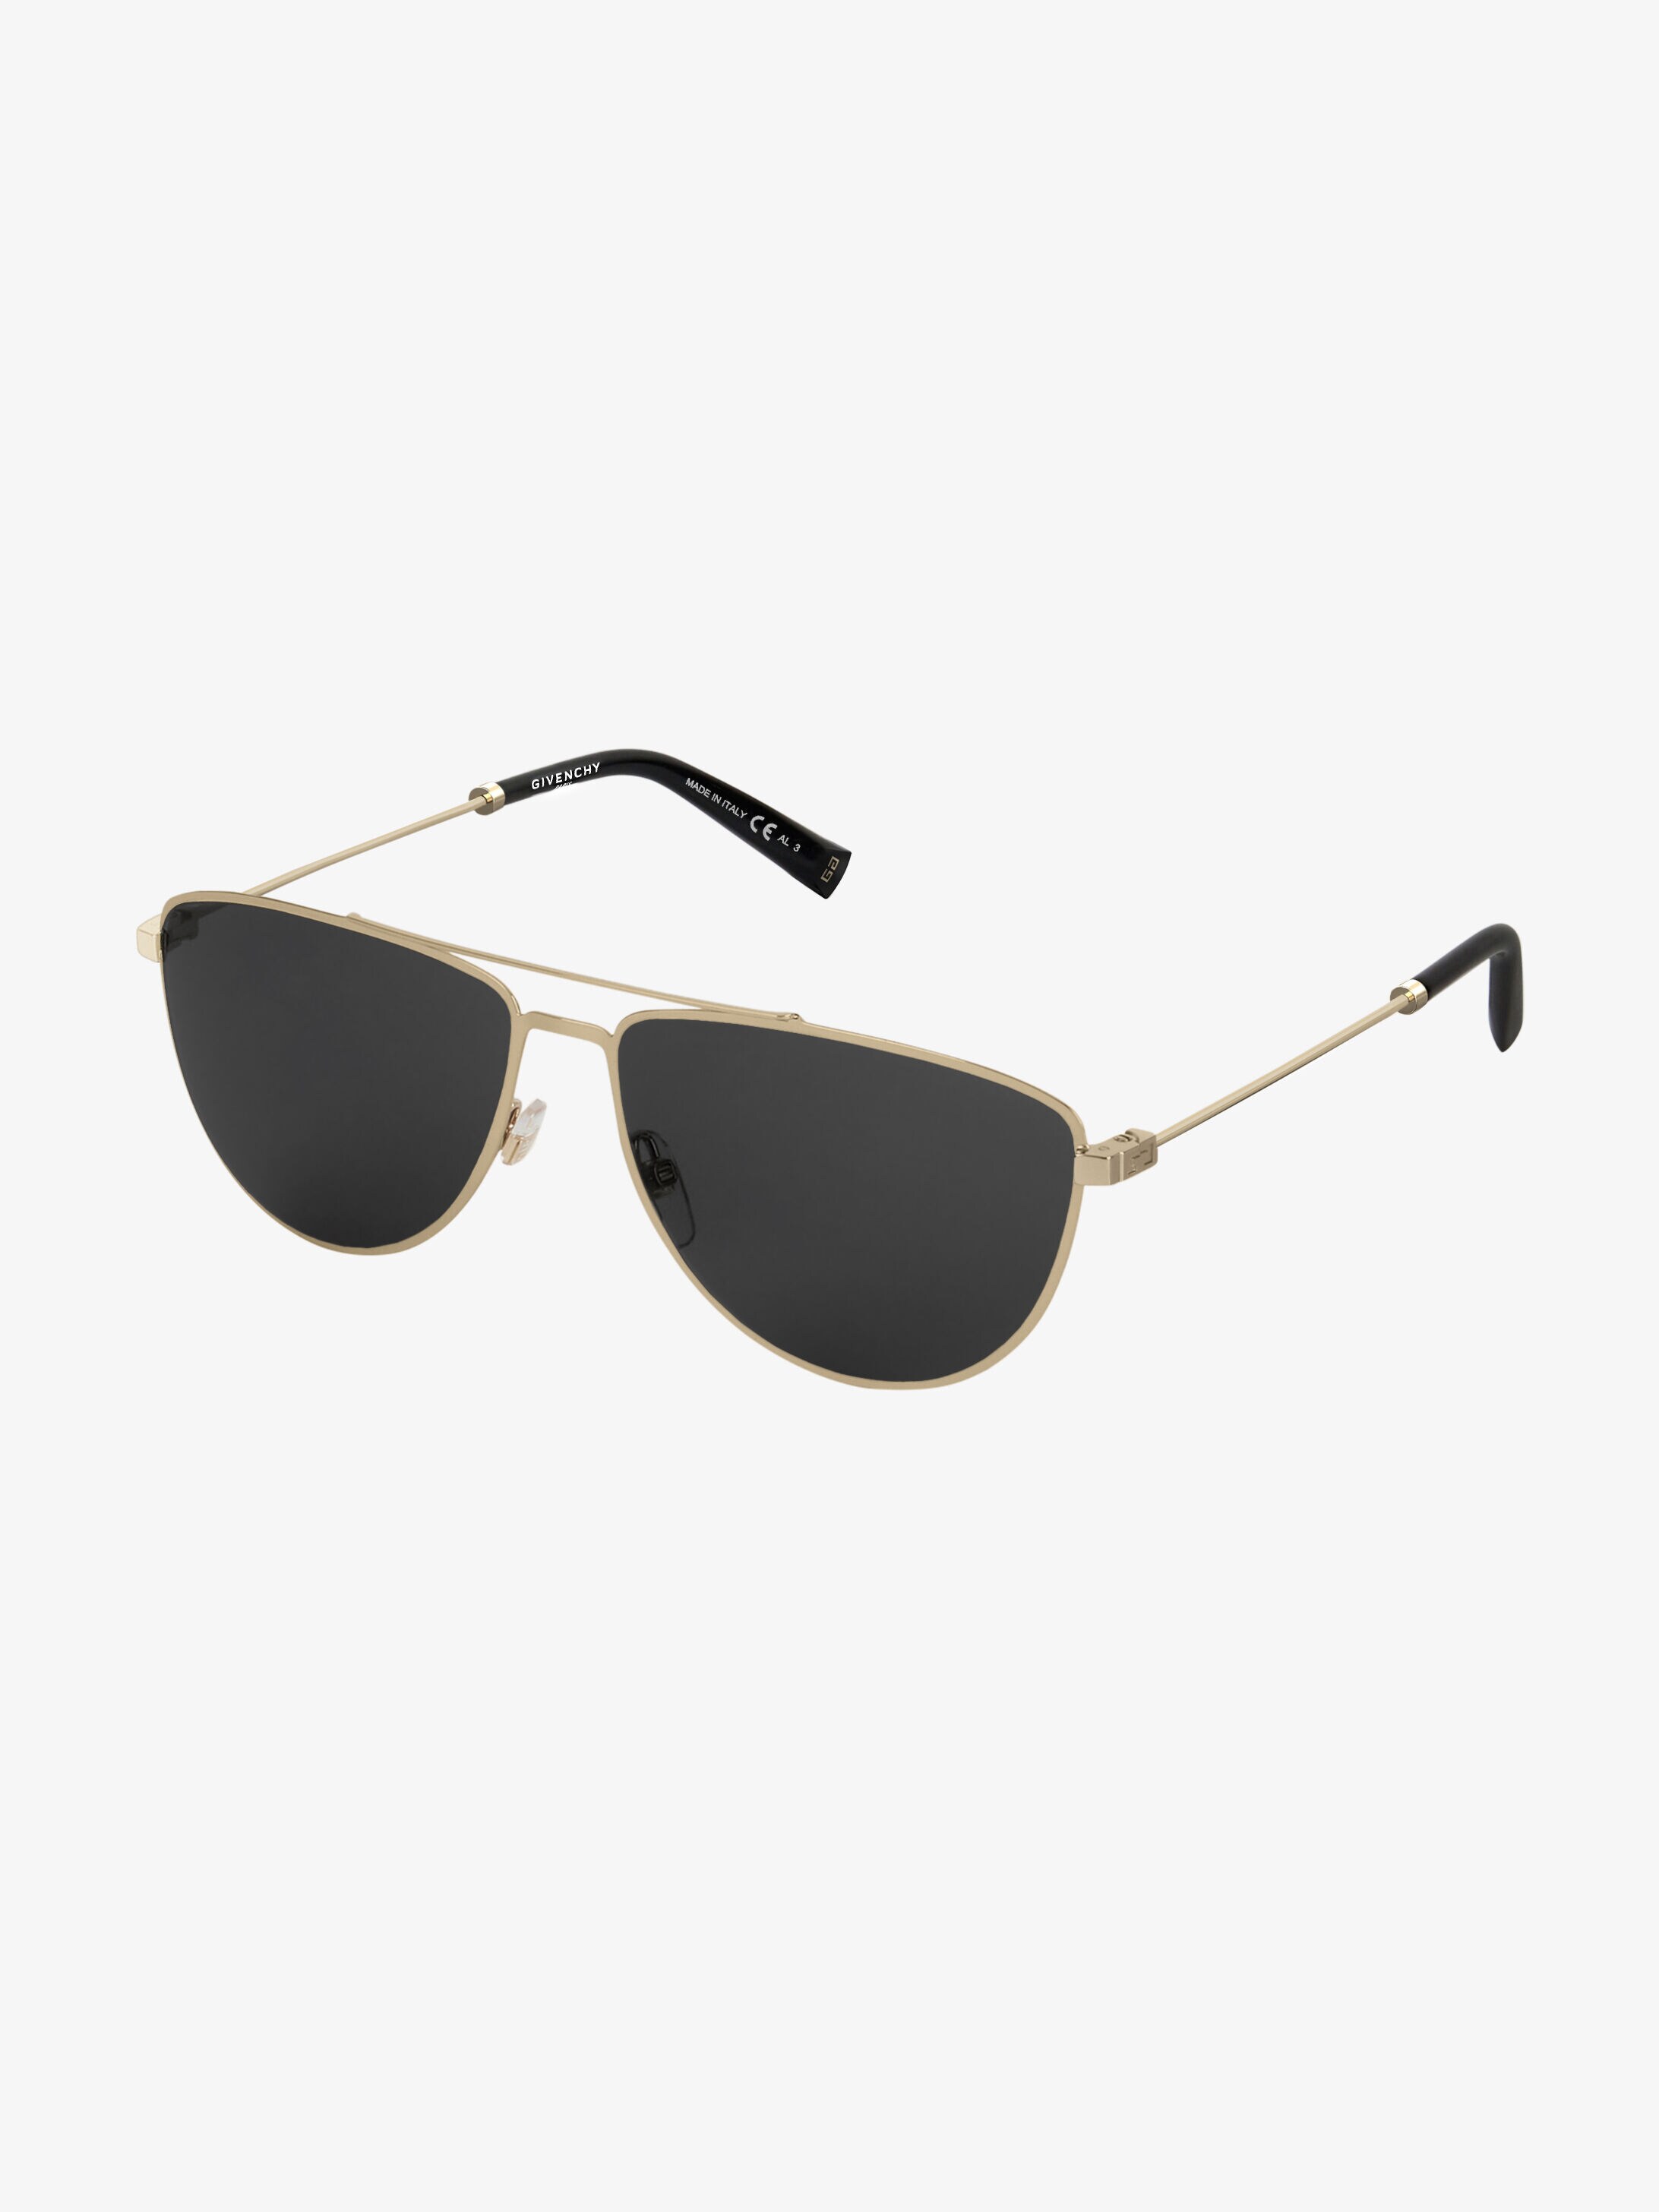 givenchy sunglasses price in india